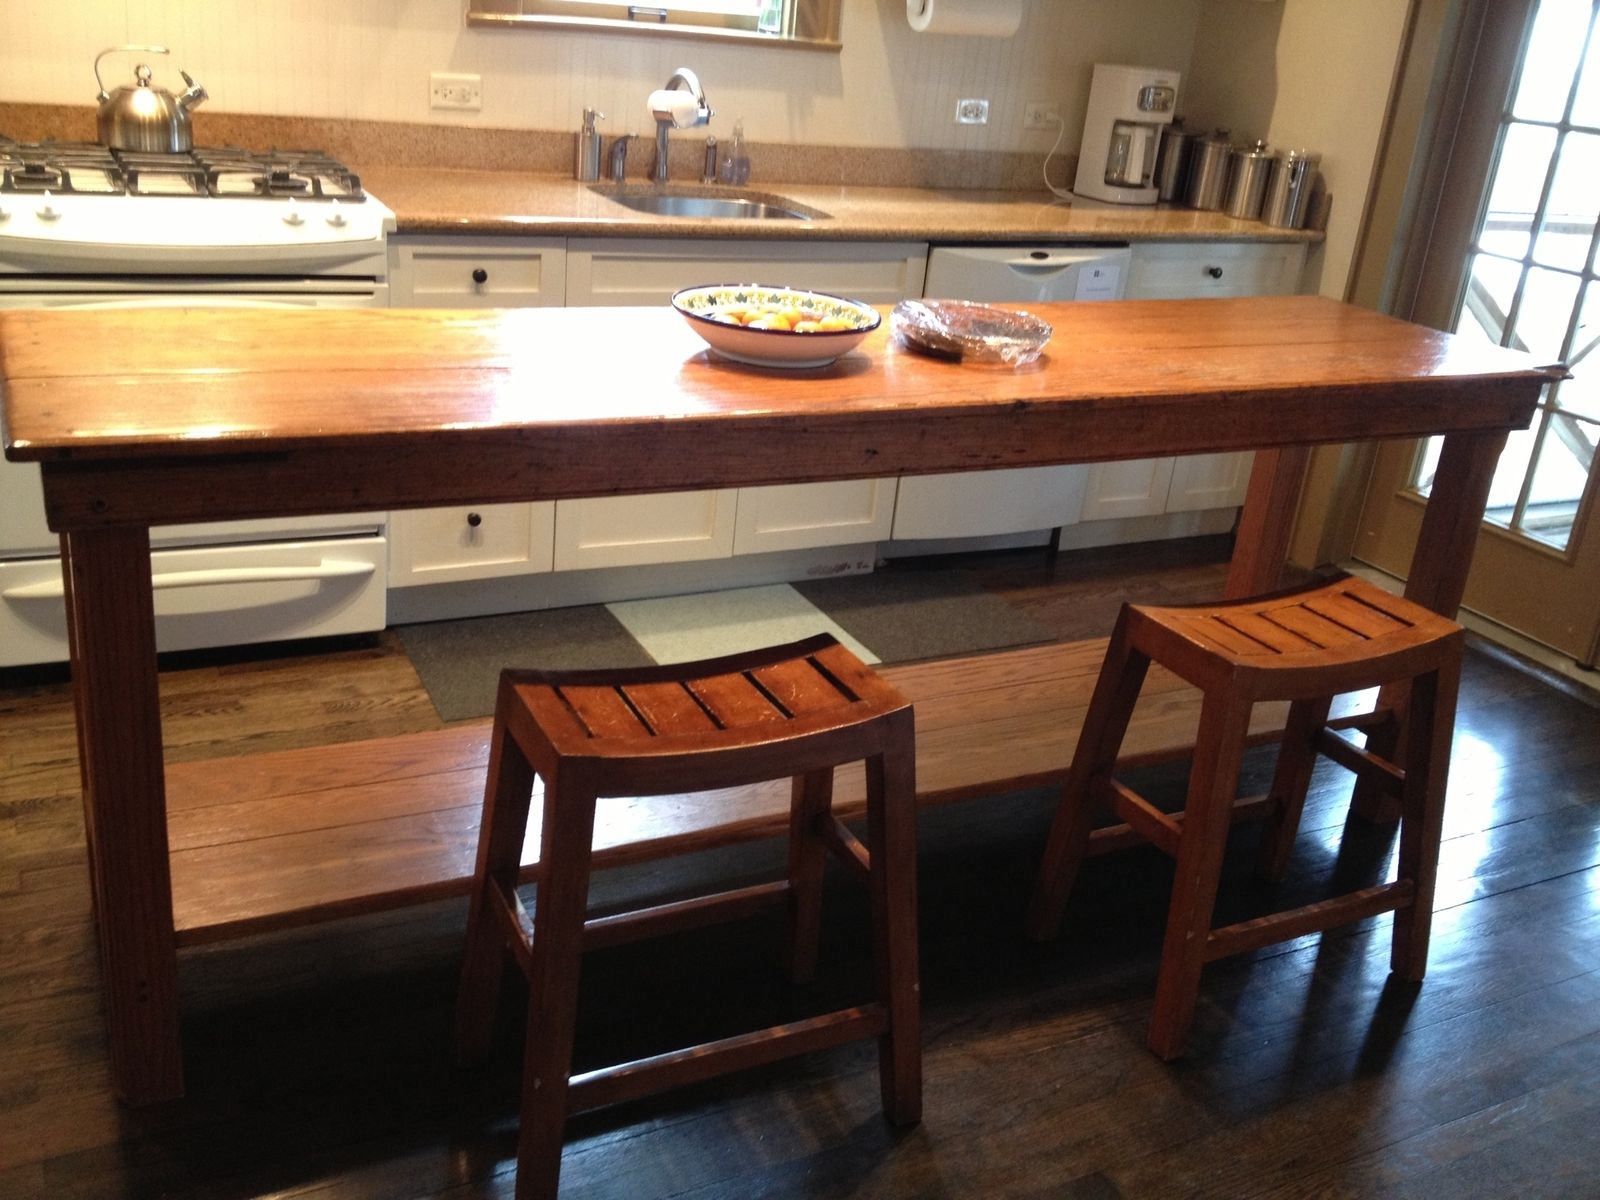 Handmade Rustic Kitchen Table By Fearons Fine Woodworking Custommadecom